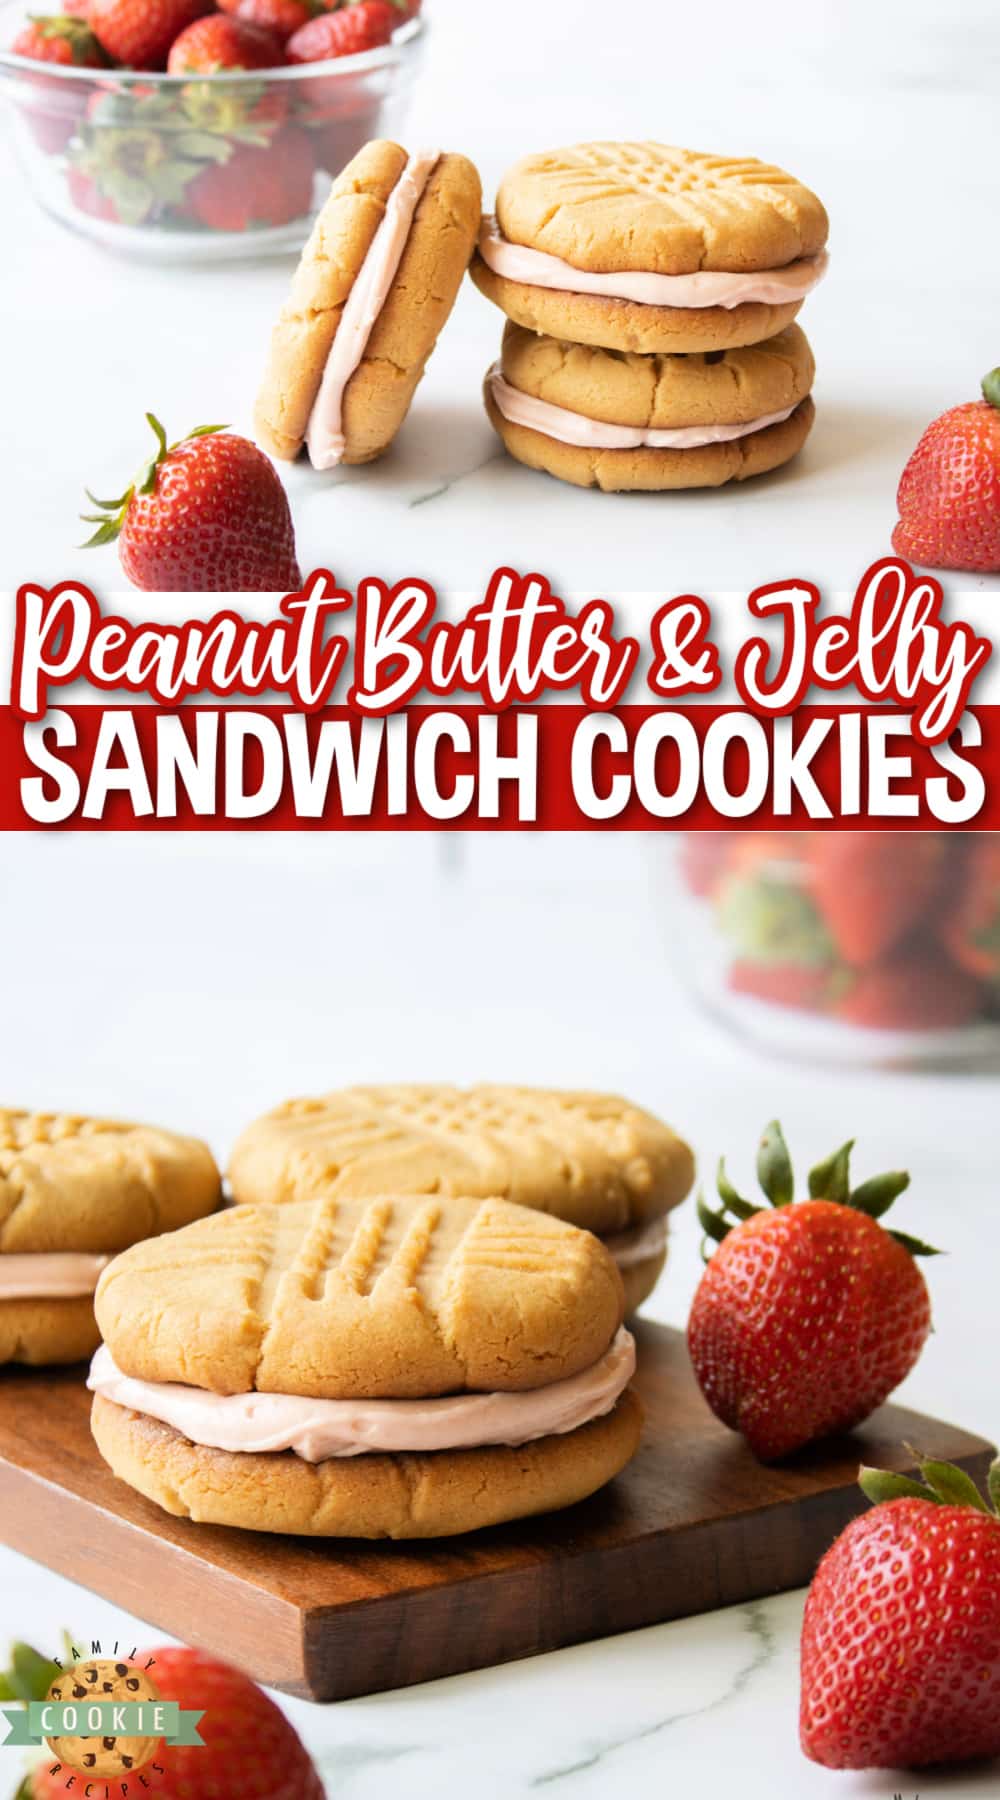 Peanut Butter and Jelly Sandwich Cookies are made by spreading a creamy strawberry buttercream frosting between two soft and chewy peanut butter cookies.  Your favorite childhood sandwich in the form of a dessert that everyone loves! 